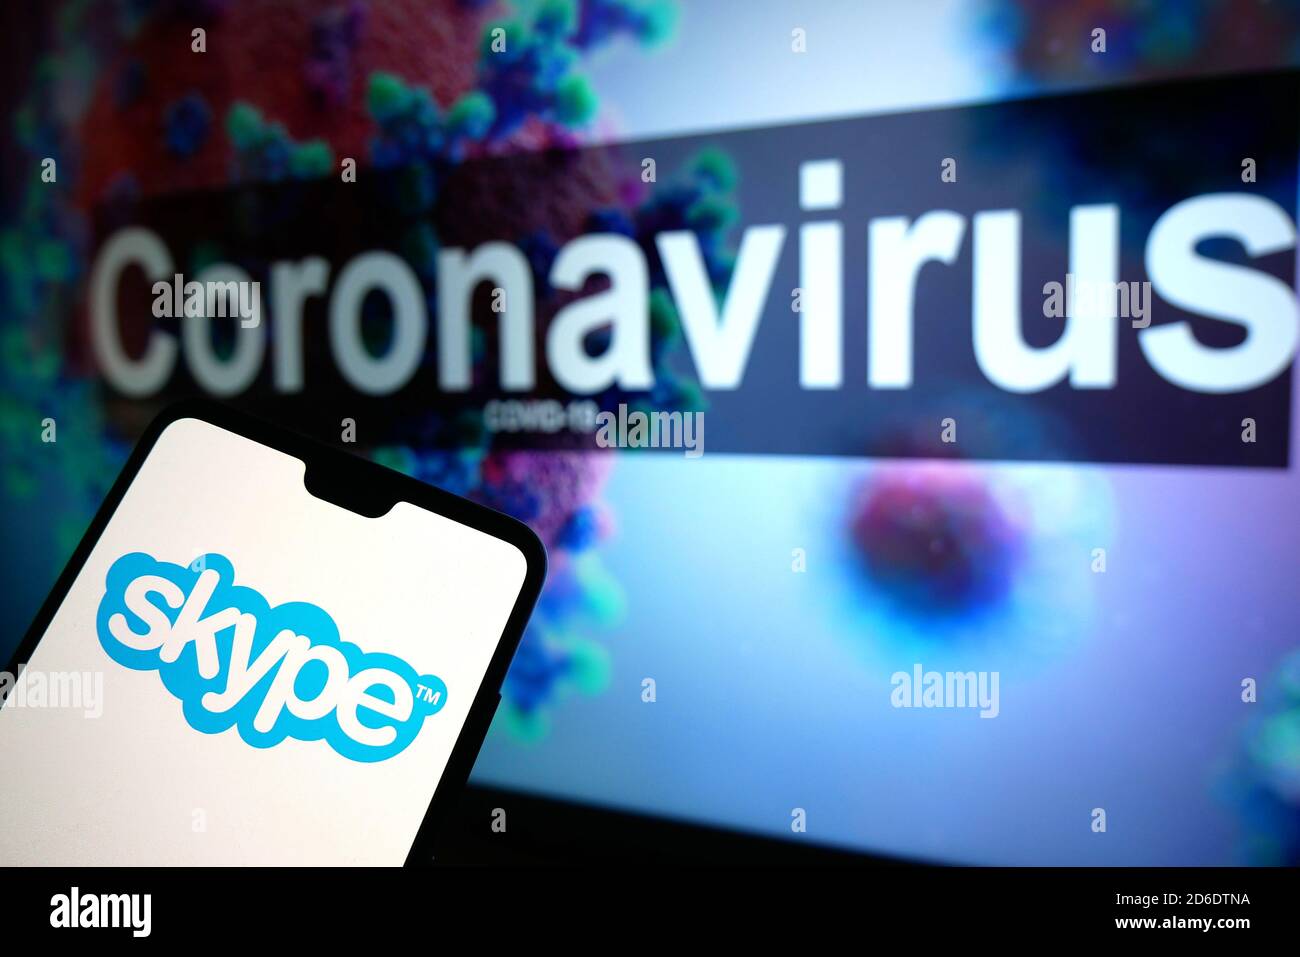 The Skype logo seen displayed on a mobile phone with an illustrative model of the Coronavirus displayed on a monitor in the background. Stock Photo